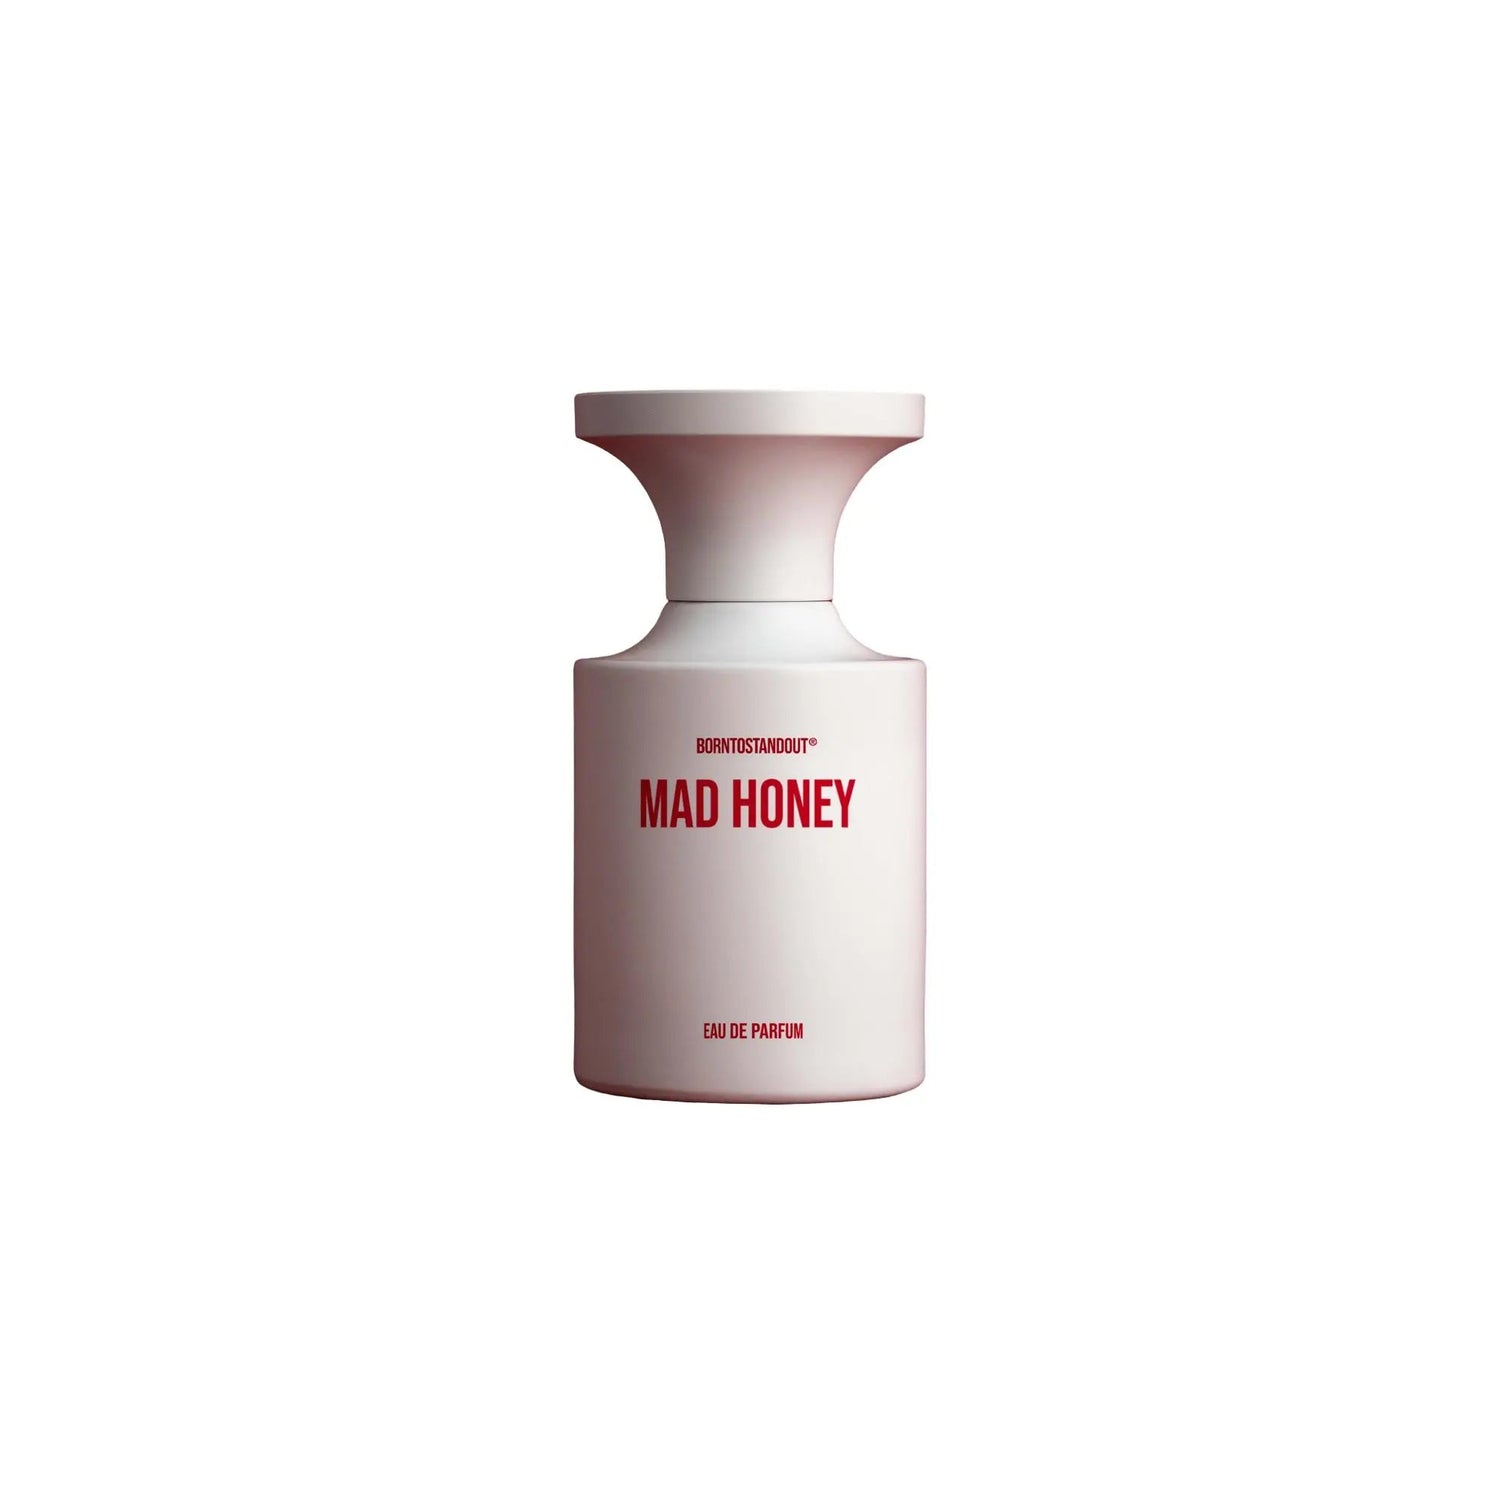 Born to stand out Mad Honey - 50ml